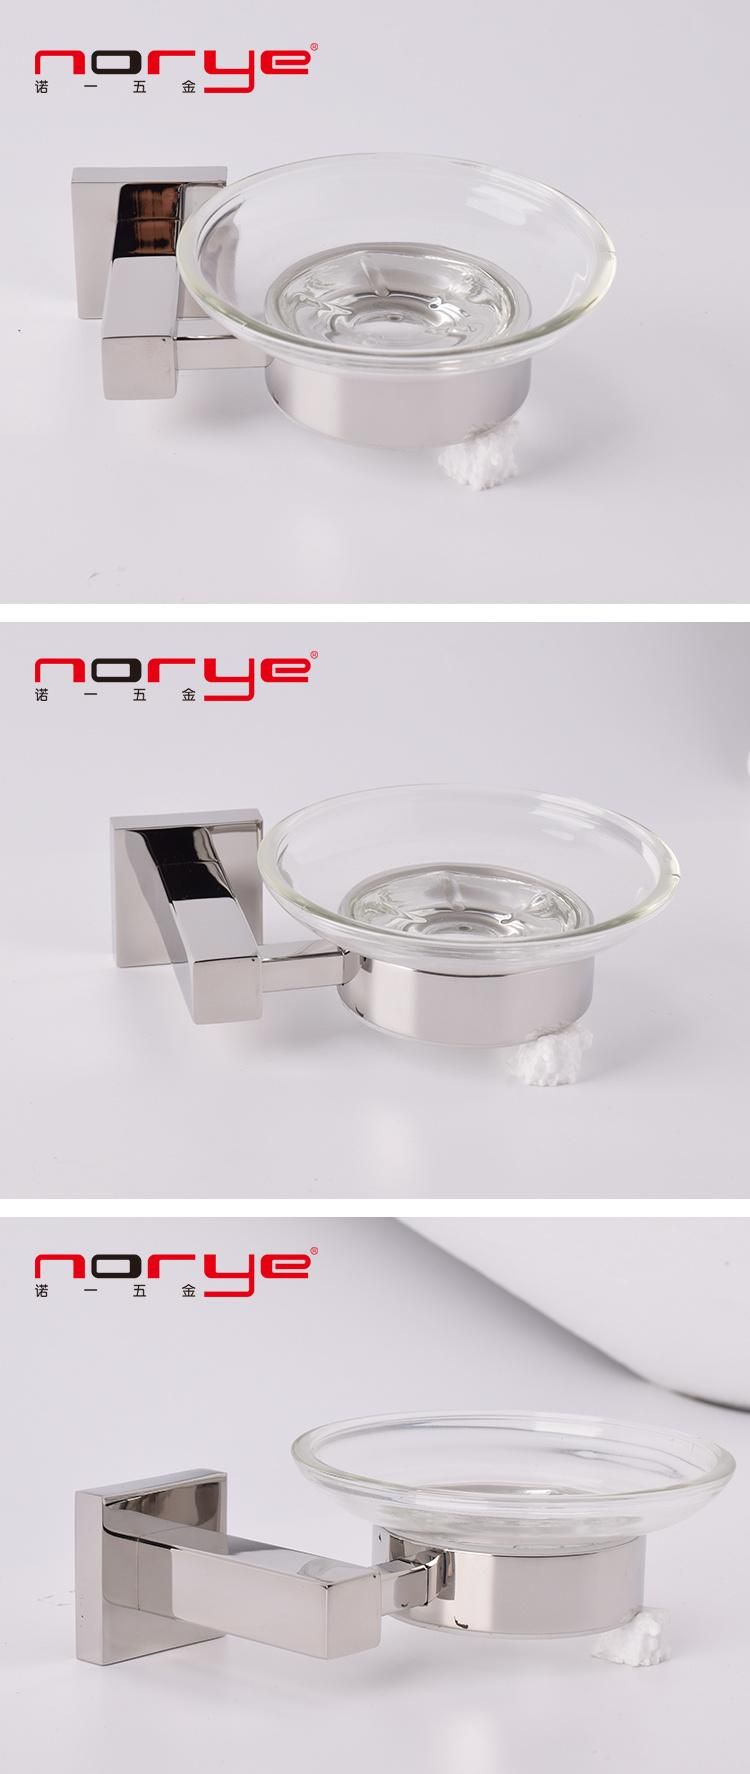 Stainless Steel 304 with Glass Soap Holder Dish Set Washroom Bathroom Accessories